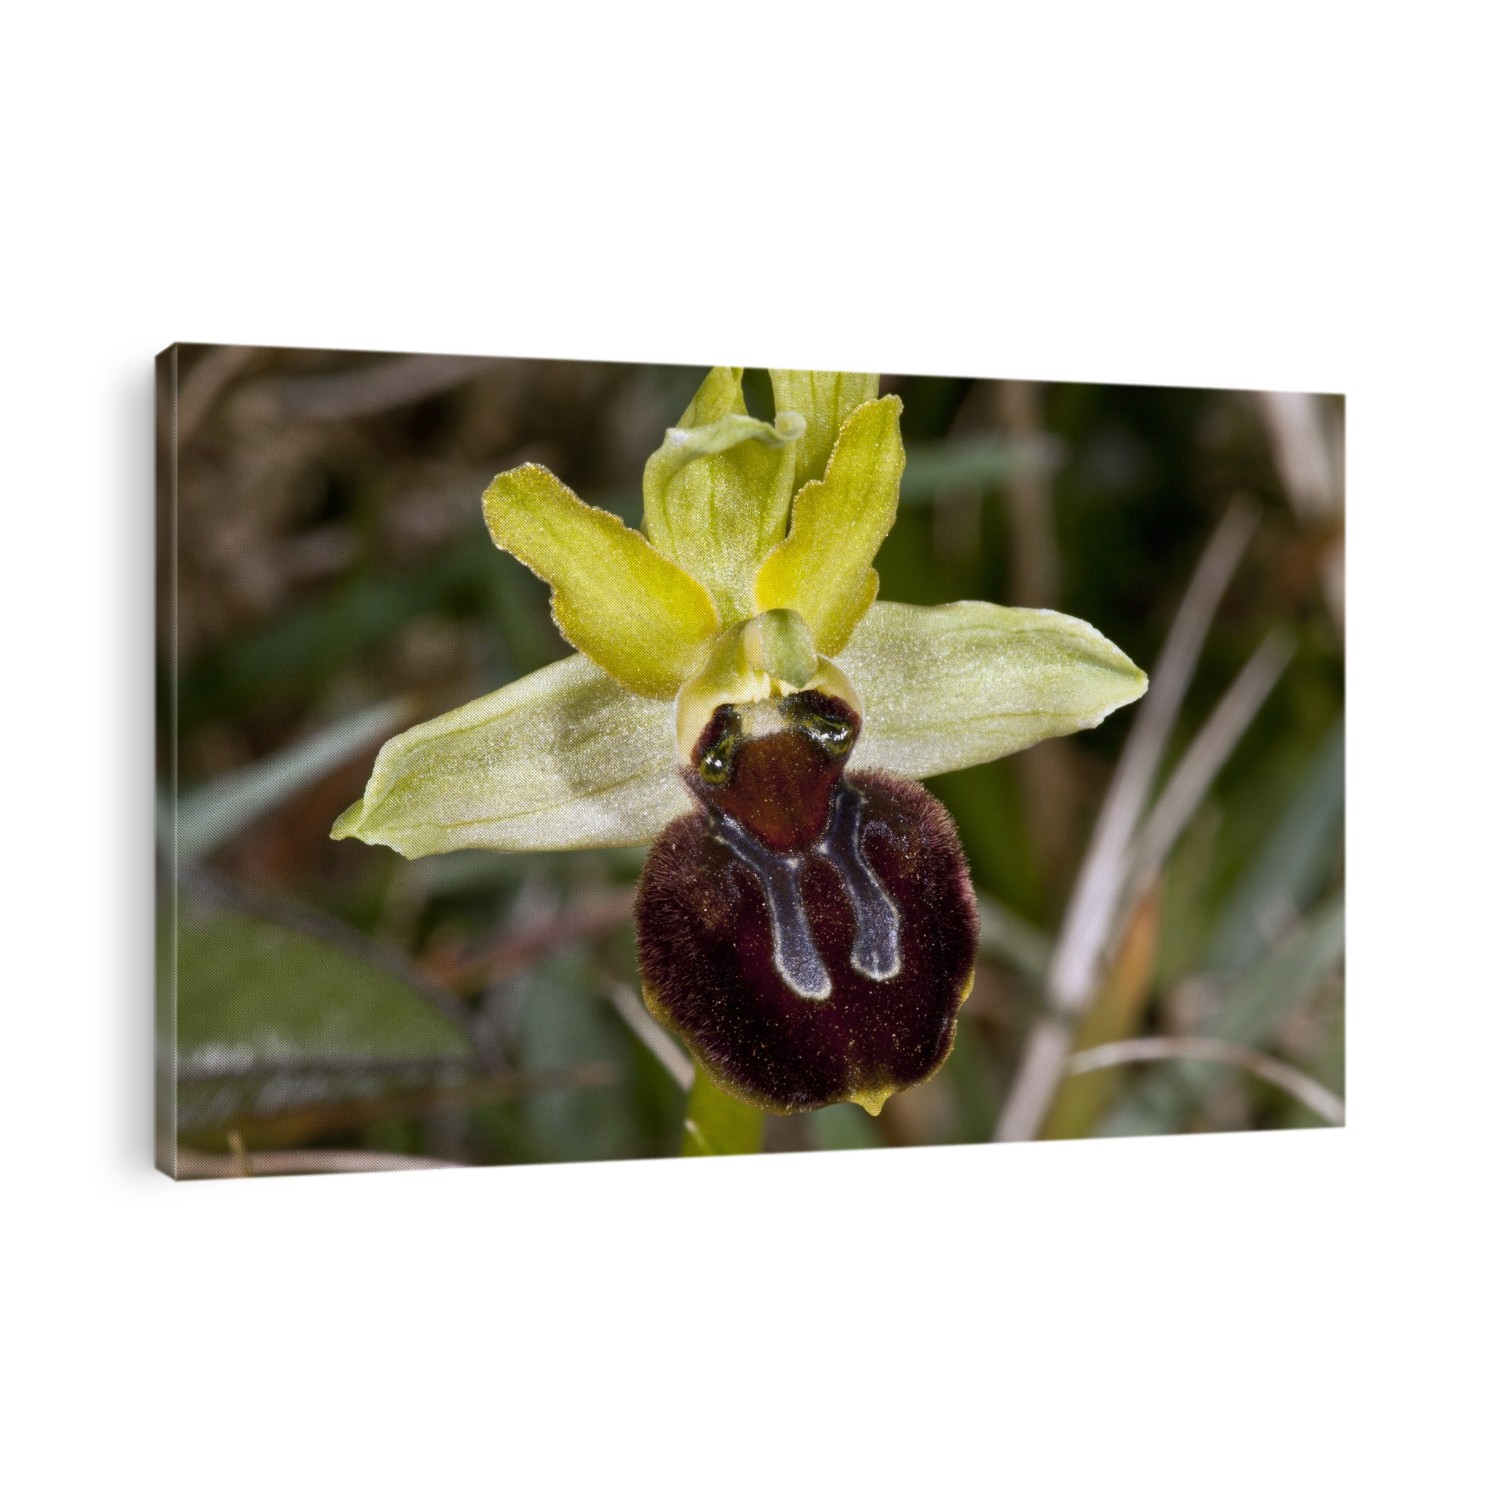 Early spider orchid (Ophrys sphegodes) flower. Photographed in Dorset, UK.